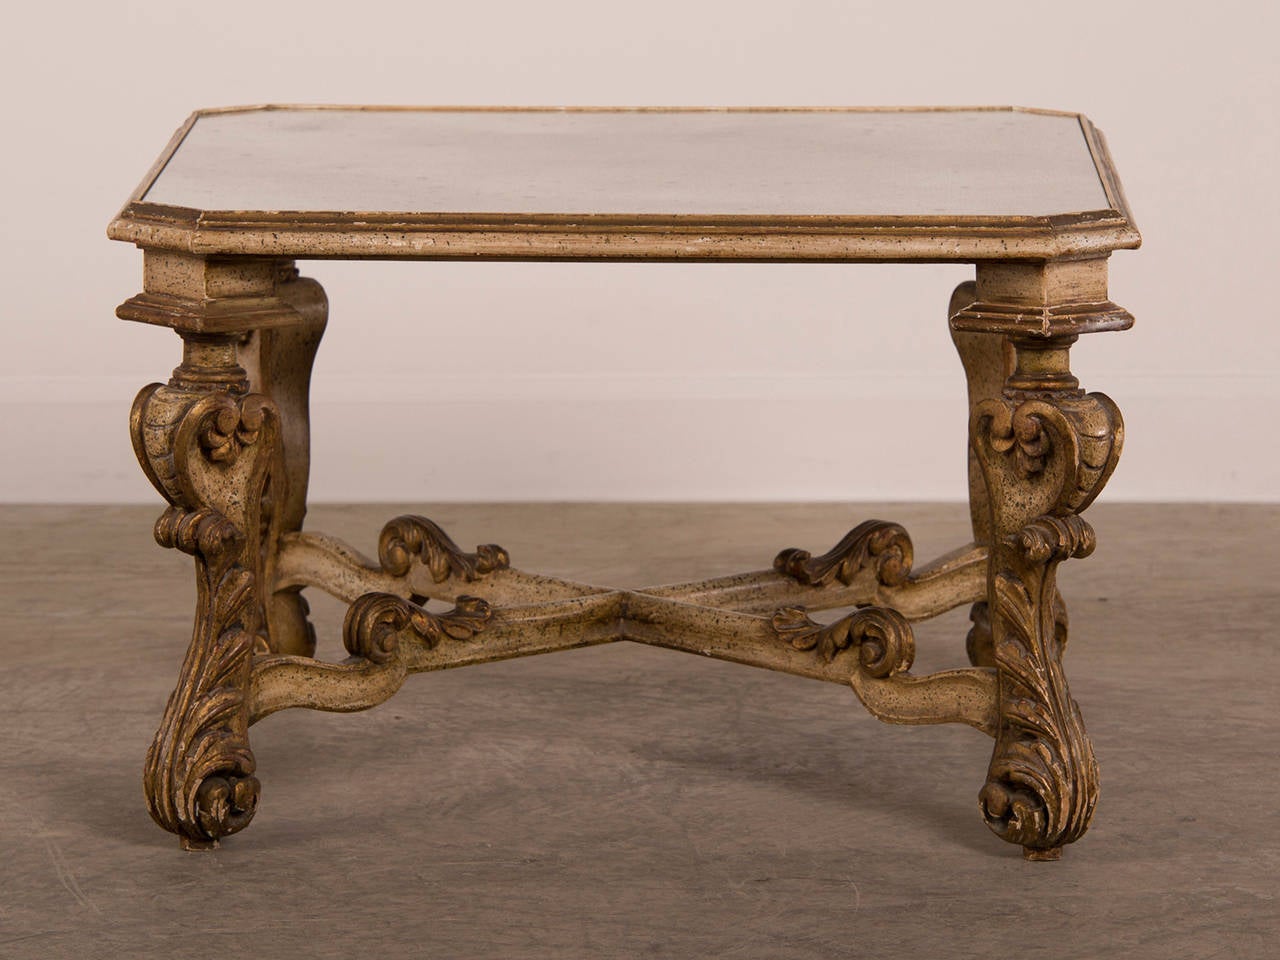 A vintage Baroque style painted and carved wood cocktail or coffee table base with a label 